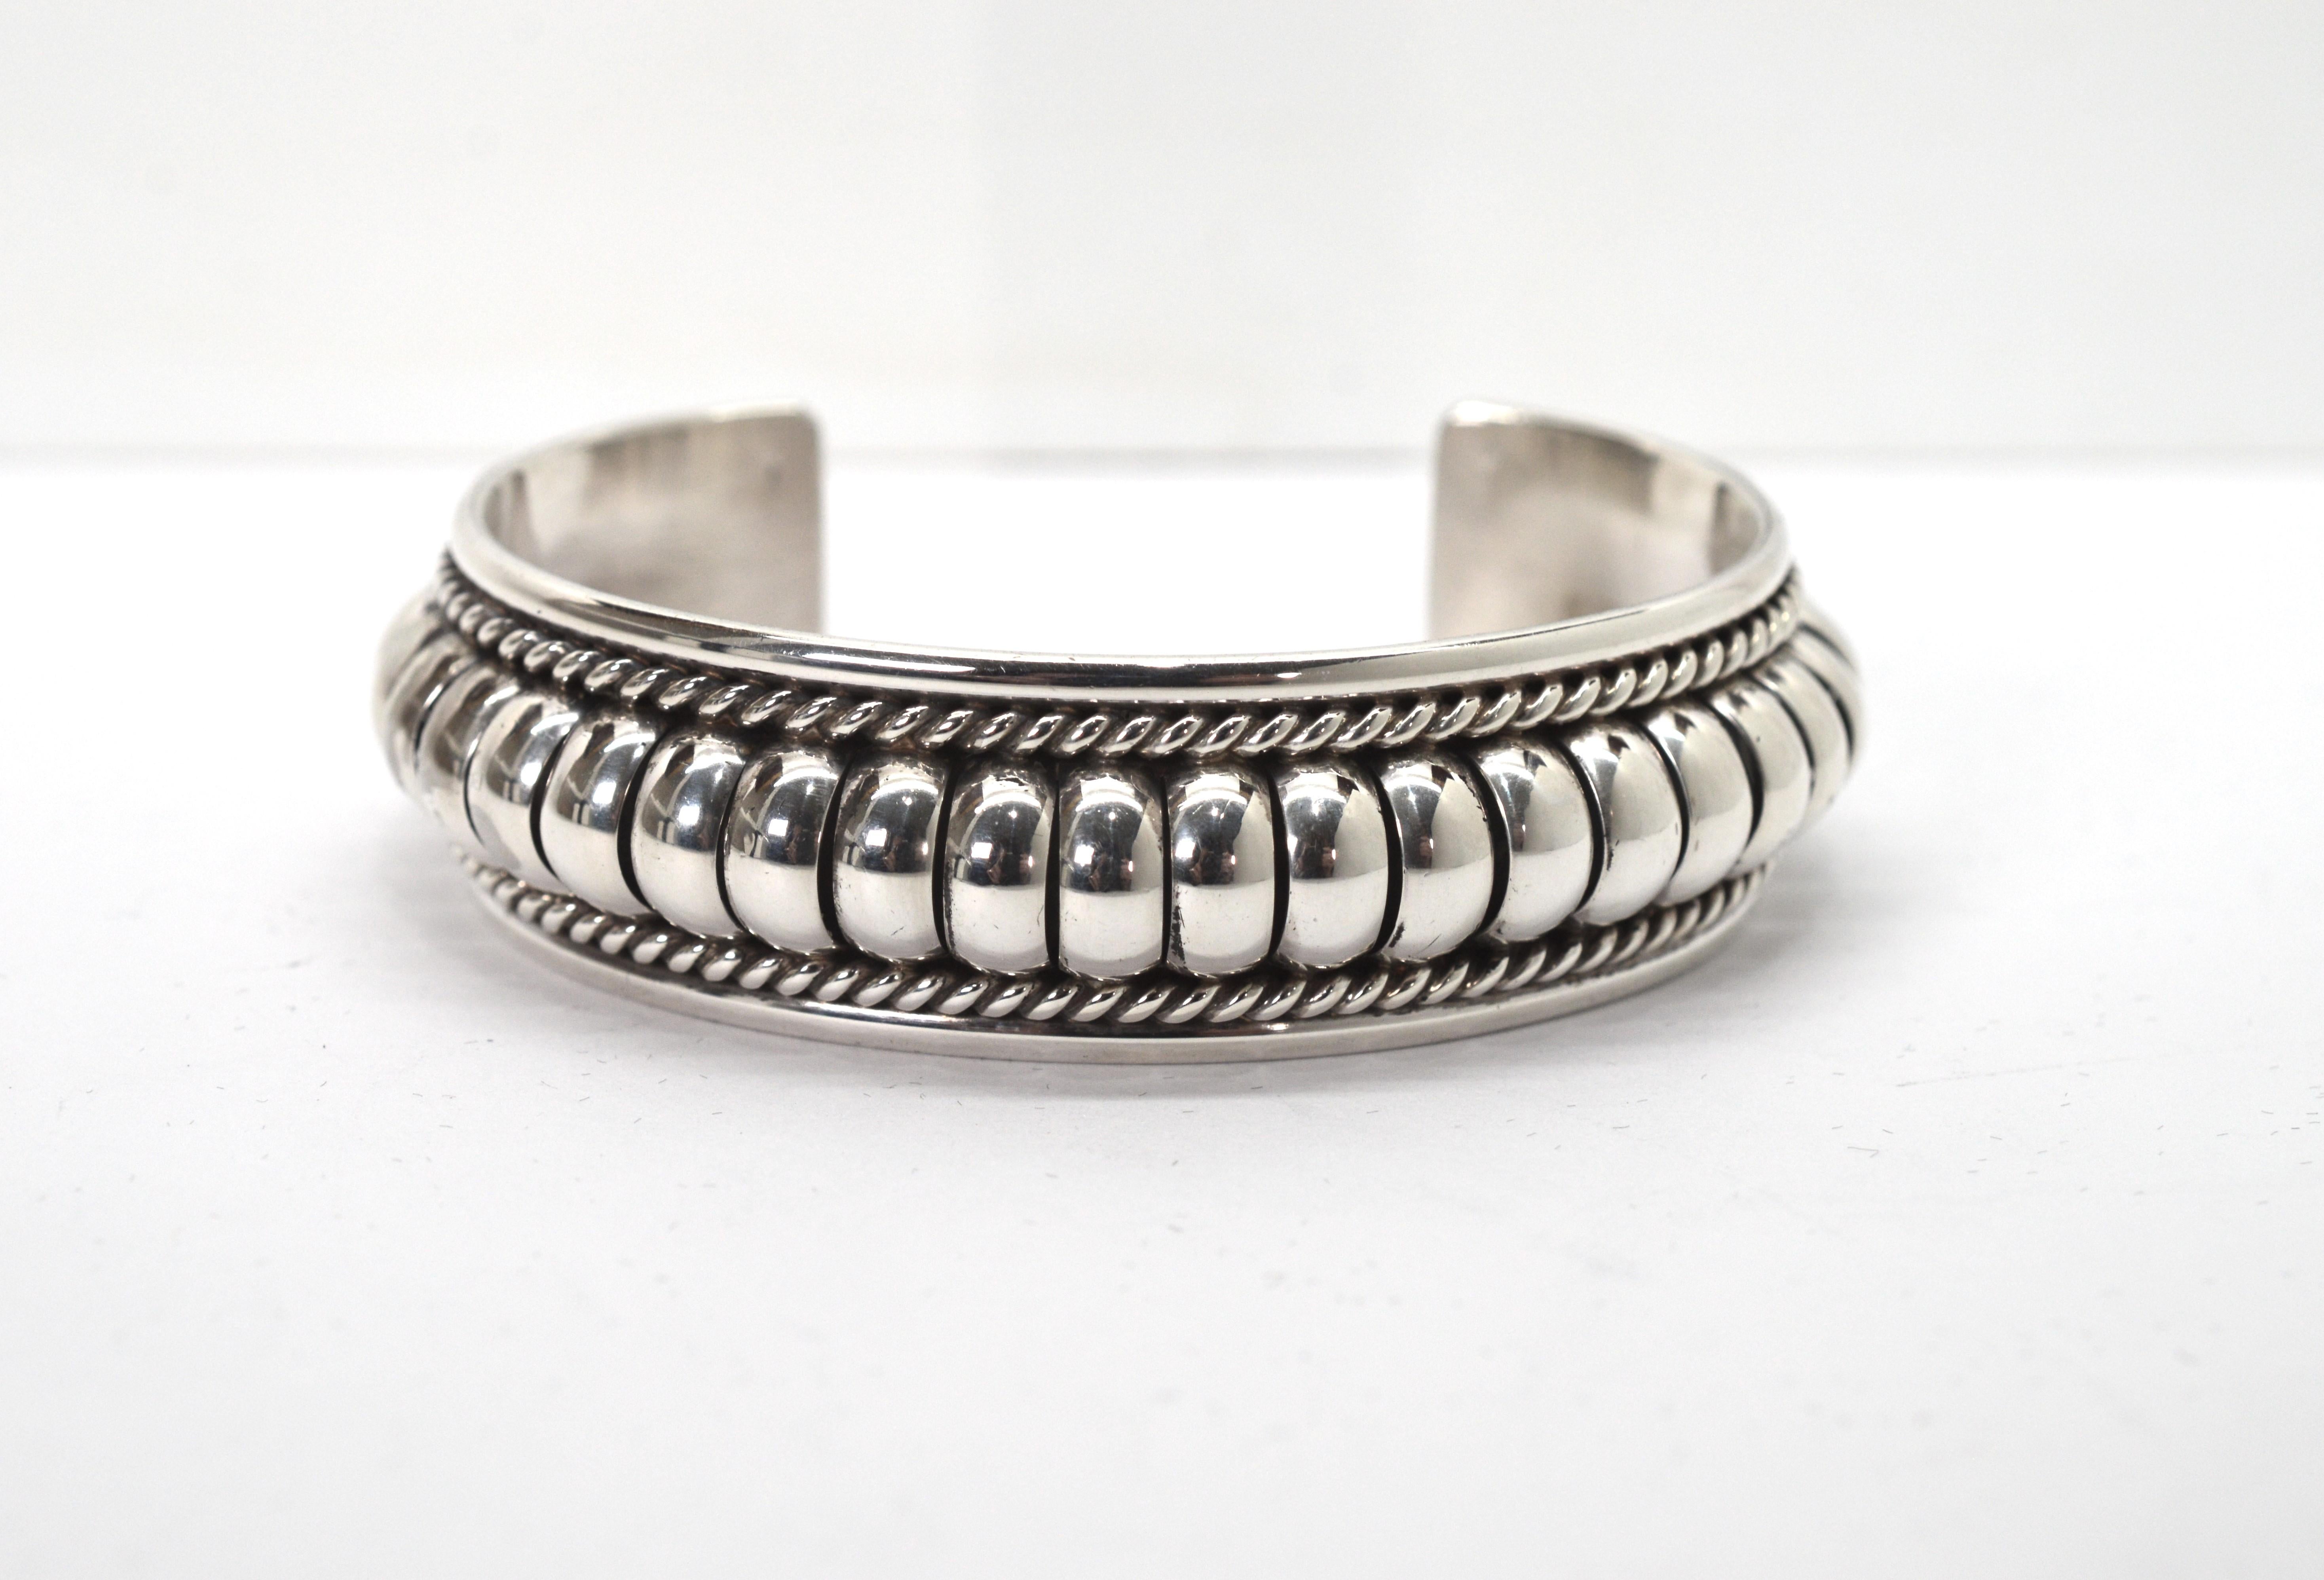 This beautifully crafted sterling silver cuff by Navajo artist, Thomas Charley,  features his signature style of dimensional design with domed silver bars framed with borders of twisted sterling ropes. This unique signature TC 